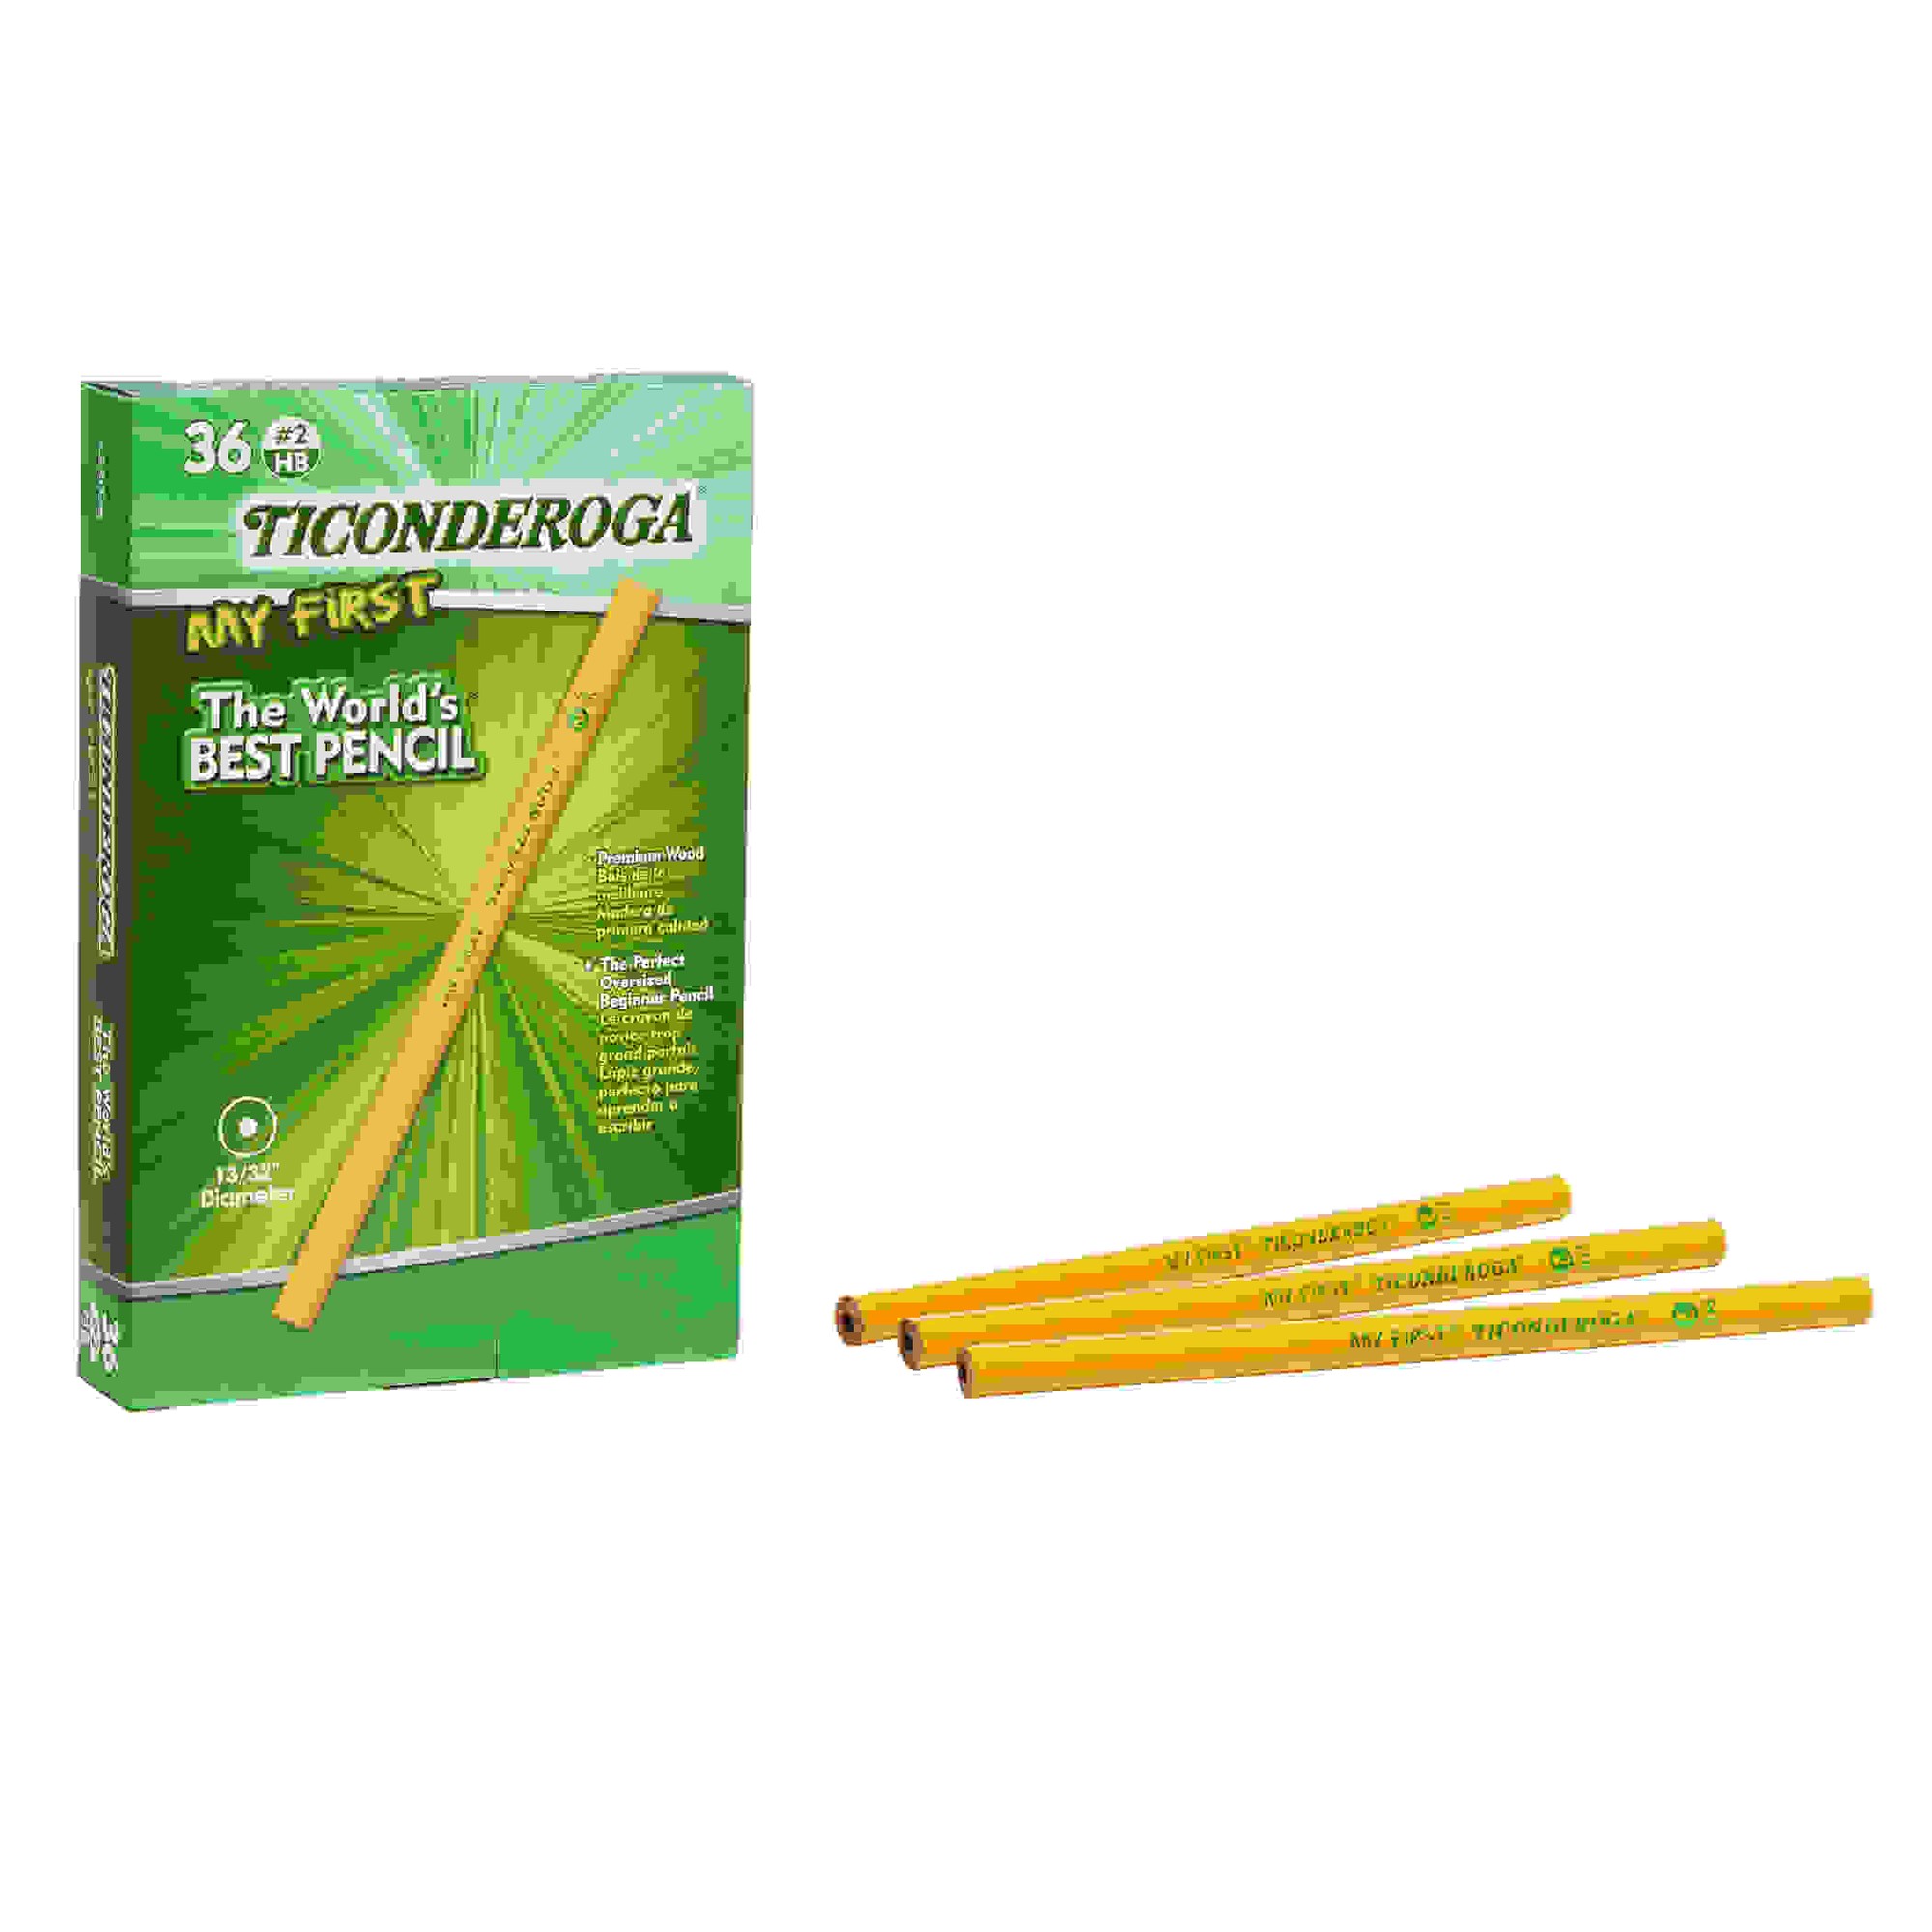 My First Ticonderoga Pencil without Eraser, 36 Count